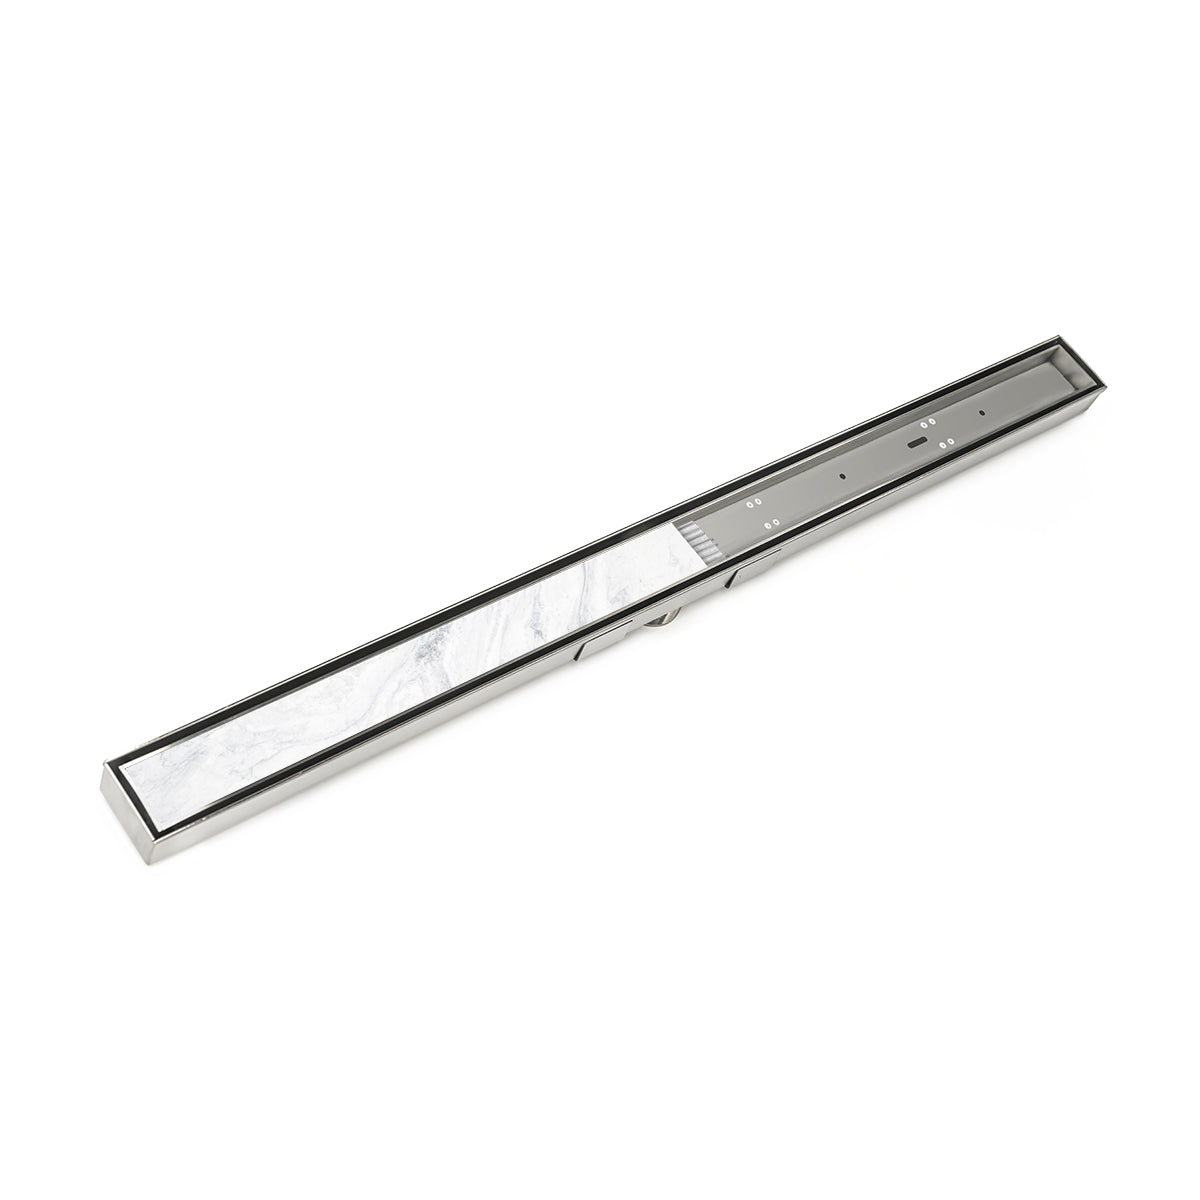 Infinity Drain 36" S-Stainless Steel Series High Flow Site Sizable Linear Drain Kit with Low Profile Tile Insert Frame with PVC Drain Body, 3" Outlet